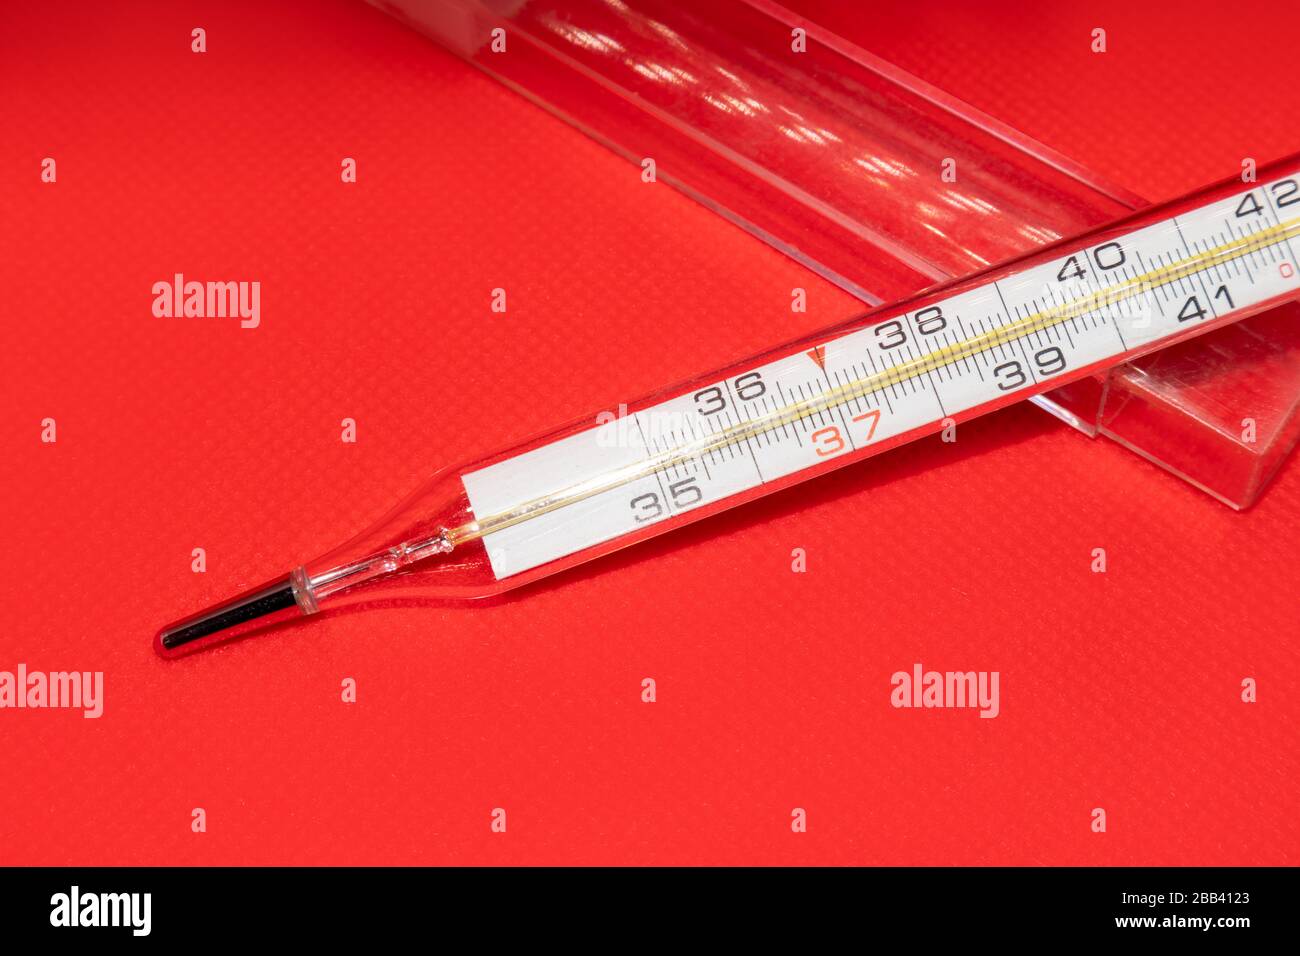 Thermometer macro, mercury instrument, measuring, indicating temperature medical equipment tool on vibrant red background Stock Photo